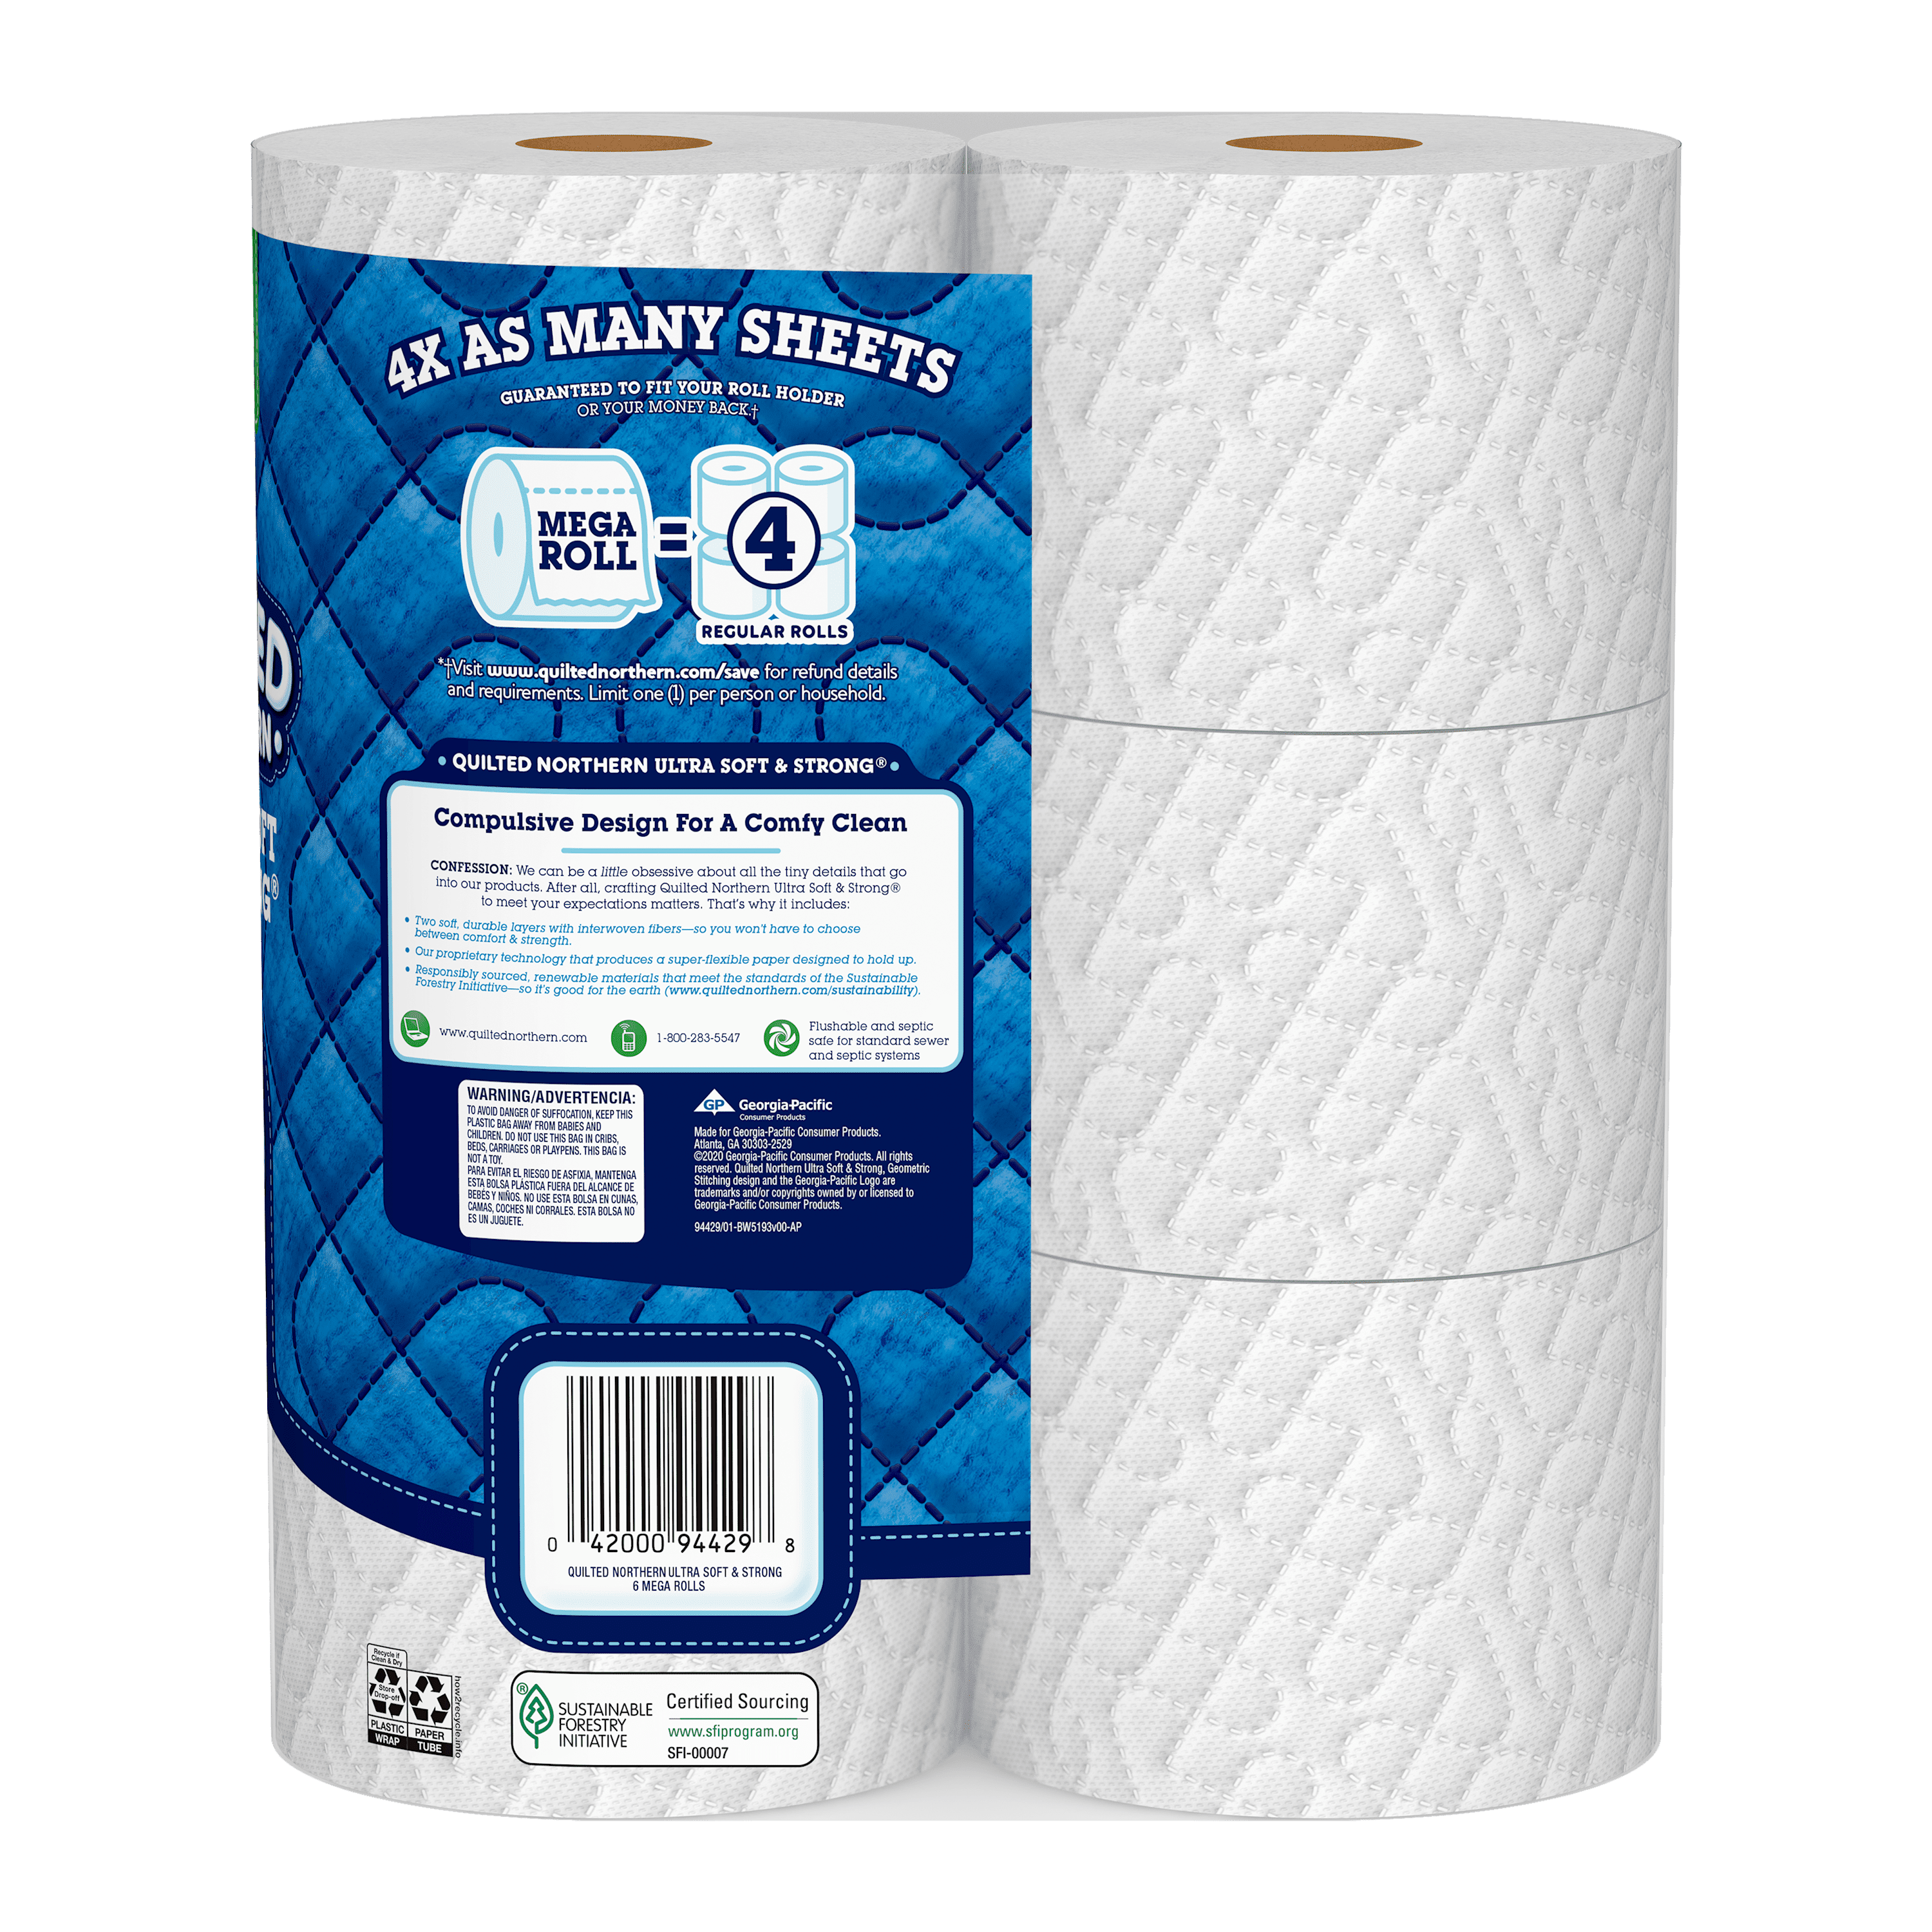 Quilted Northern Ultra Plush Toilet Paper 6 Rolls, 6 rolls - Baker's